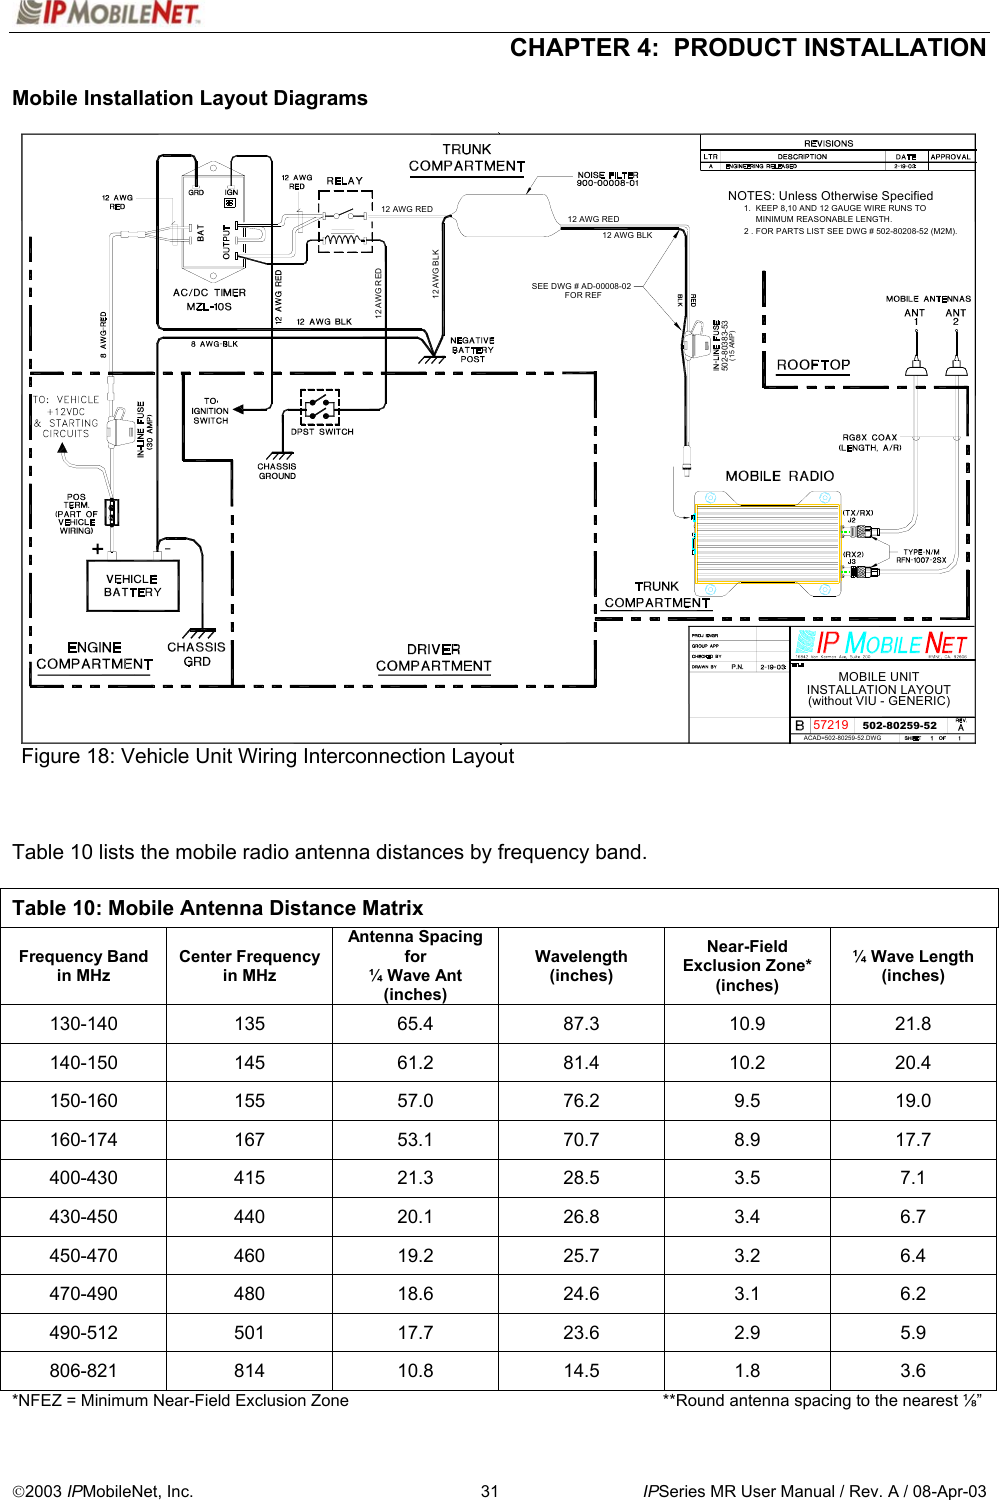  CHAPTER 4:  PRODUCT INSTALLATION  2003 IPMobileNet, Inc.  31  IPSeries MR User Manual / Rev. A / 08-Apr-03 Mobile Installation Layout Diagrams                              Figure 18: Vehicle Unit Wiring Interconnection Layout    Table 10 lists the mobile radio antenna distances by frequency band.  Table 10: Mobile Antenna Distance Matrix Frequency Band in MHz Center Frequency in MHz Antenna Spacing for ¼ Wave Ant (inches) Wavelength (inches) Near-Field Exclusion Zone* (inches) ¼ Wave Length (inches) 130-140 135  65.4 87.3 10.9 21.8 140-150 145  61.2 81.4 10.2 20.4 150-160 155 57.0 76.2 9.5 19.0 160-174 167 53.1 70.7 8.9 17.7 400-430 415  21.3  28.5  3.5  7.1 430-450 440  20.1  26.8  3.4  6.7 450-470 460  19.2  25.7  3.2  6.4 470-490 480  18.6  24.6  3.1  6.2 490-512 501  17.7  23.6  2.9  5.9 806-821 814  10.8  14.5  1.8  3.6 *NFEZ = Minimum Near-Field Exclusion Zone                    **Round antenna spacing to the nearest ⅛” 12 AWG BLK2 . FOR PARTS LIST SEE DWG # 502-80208-52 (M2M).(15 AMP)(without VIU - GENERIC)MINIMUM REASONABLE LENGTH.1.  KEEP 8,10 AND 12 GAUGE WIRE RUNS TONOTES: Unless Otherwise SpecifiedSEE DWG # AD-00008-02FOR REF12 AWG BLK502-80383-5312 AWG RED12 AWG RED12 AWG RED57219 502-80259-52ACAD=502-80259-52.DWGMOBILE UNITINSTALLATION LAYOUT